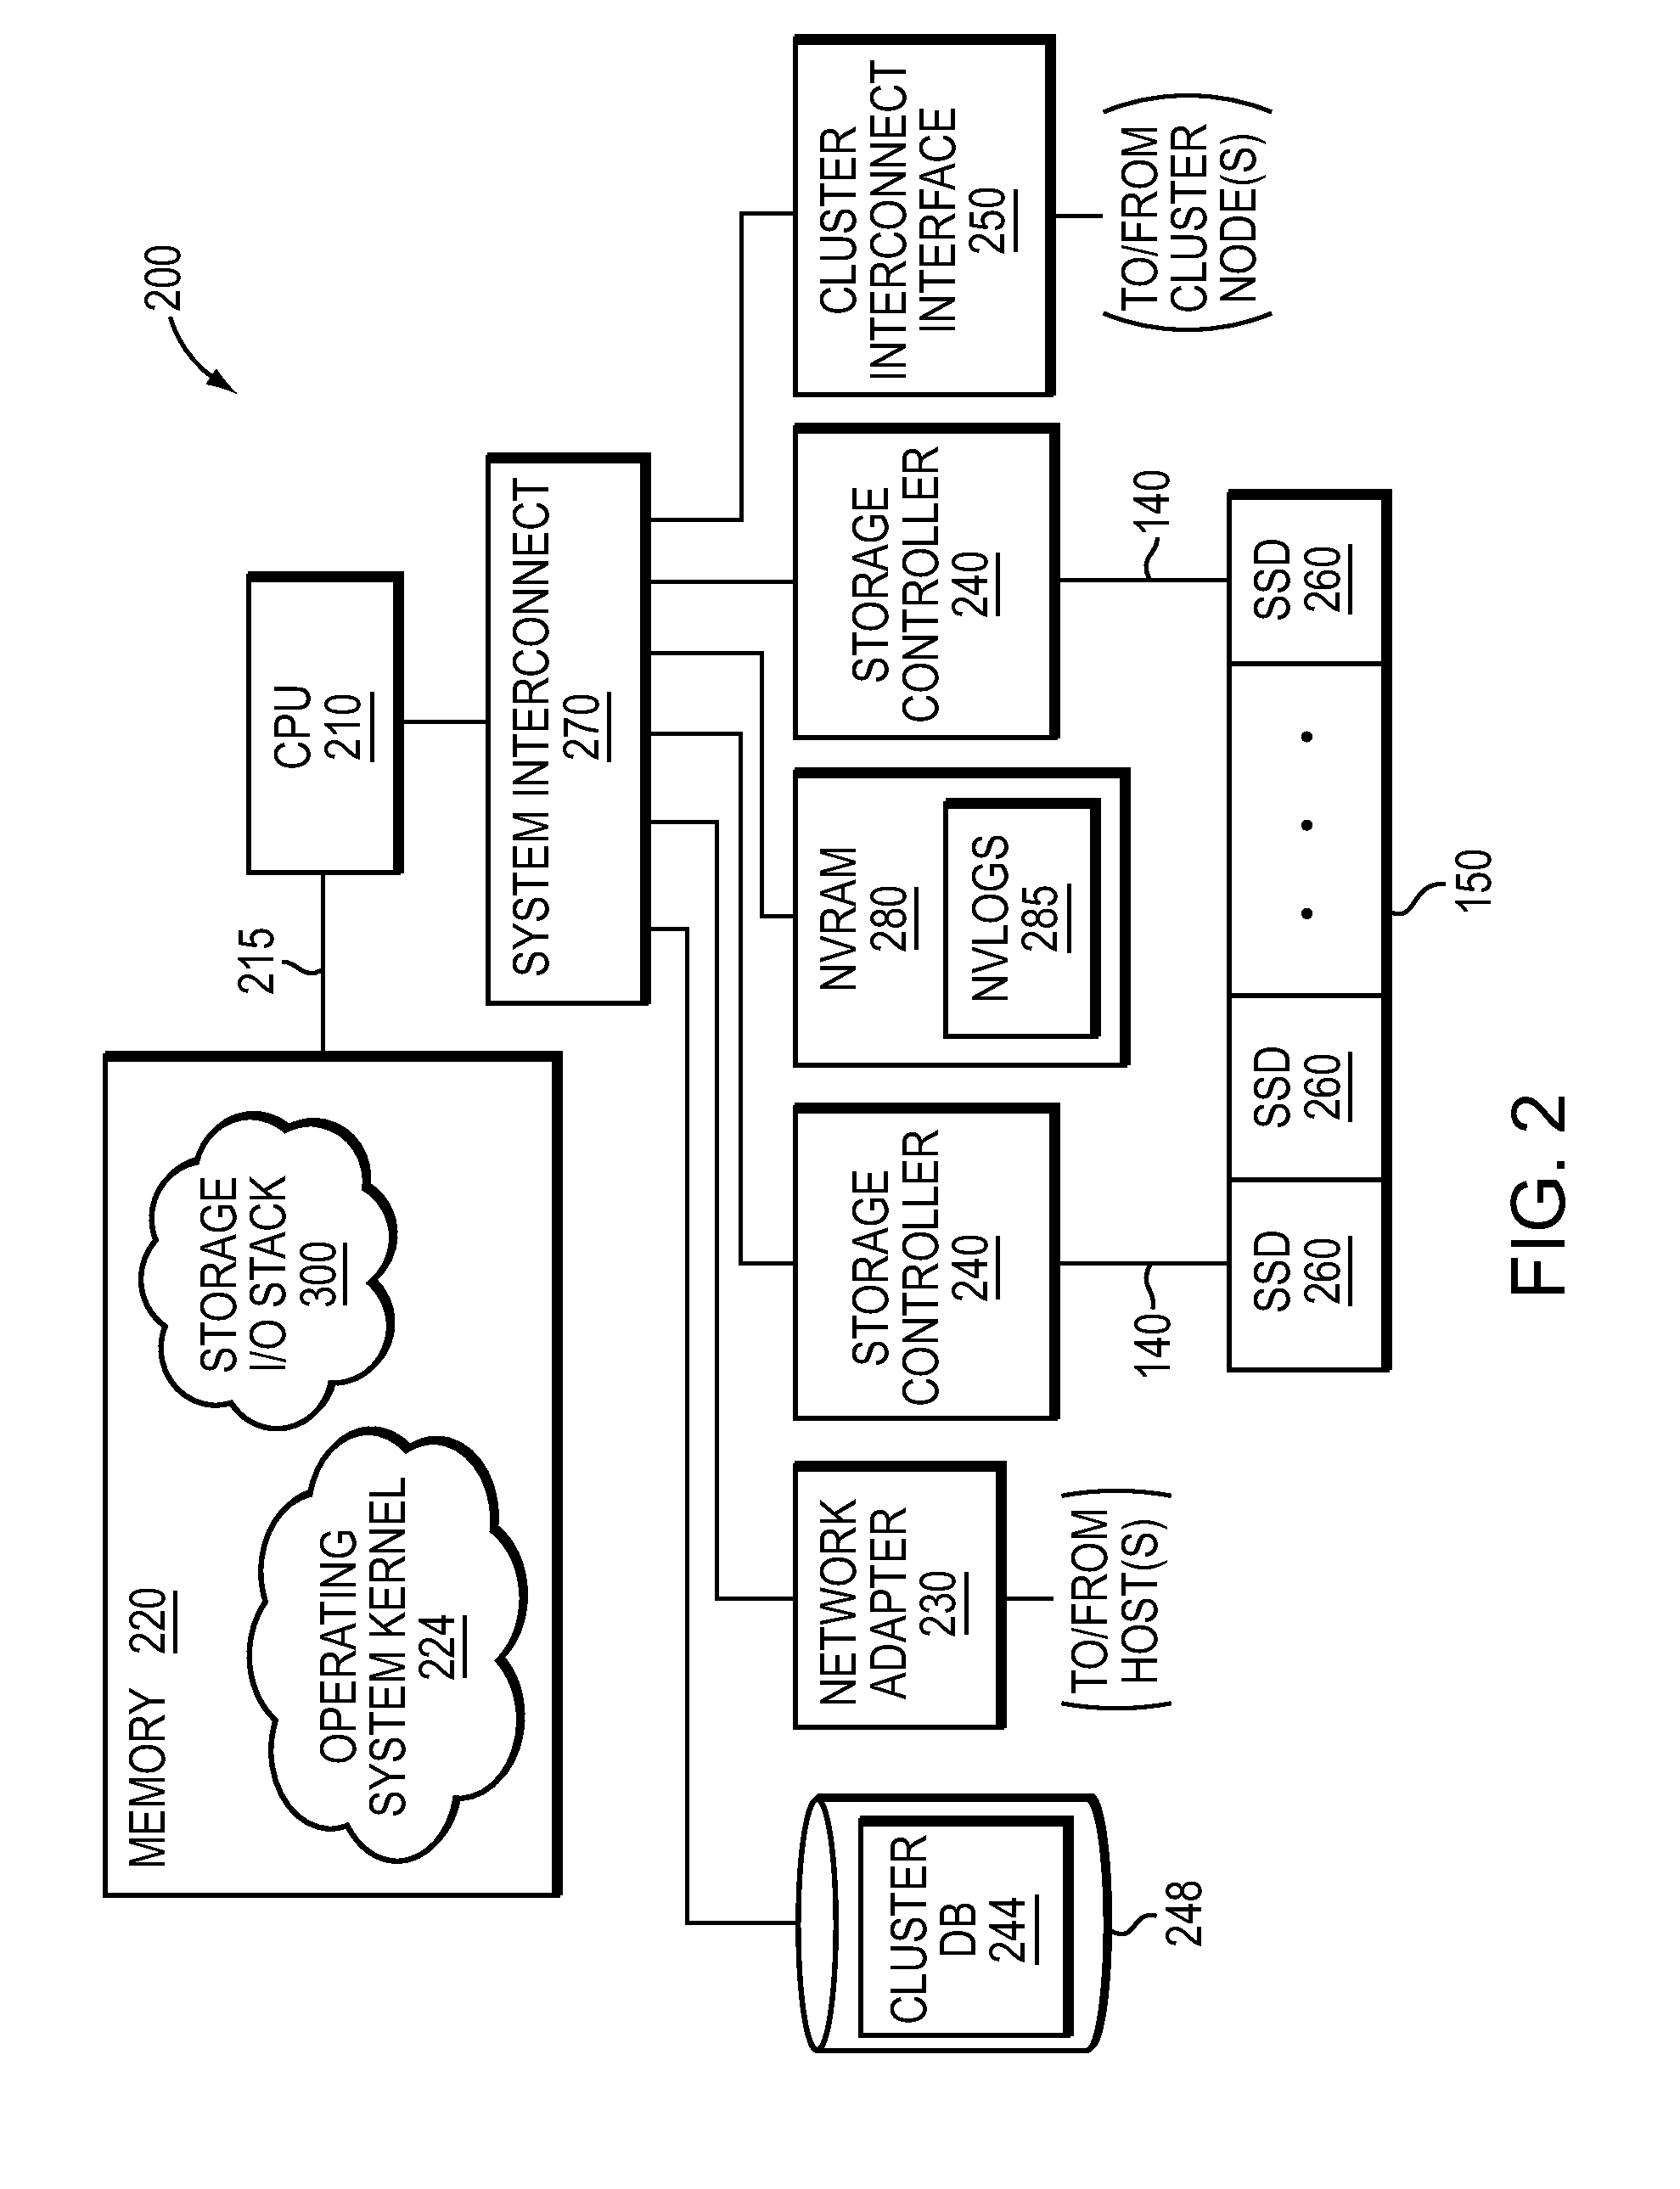 NVRAM caching and logging in a storage system